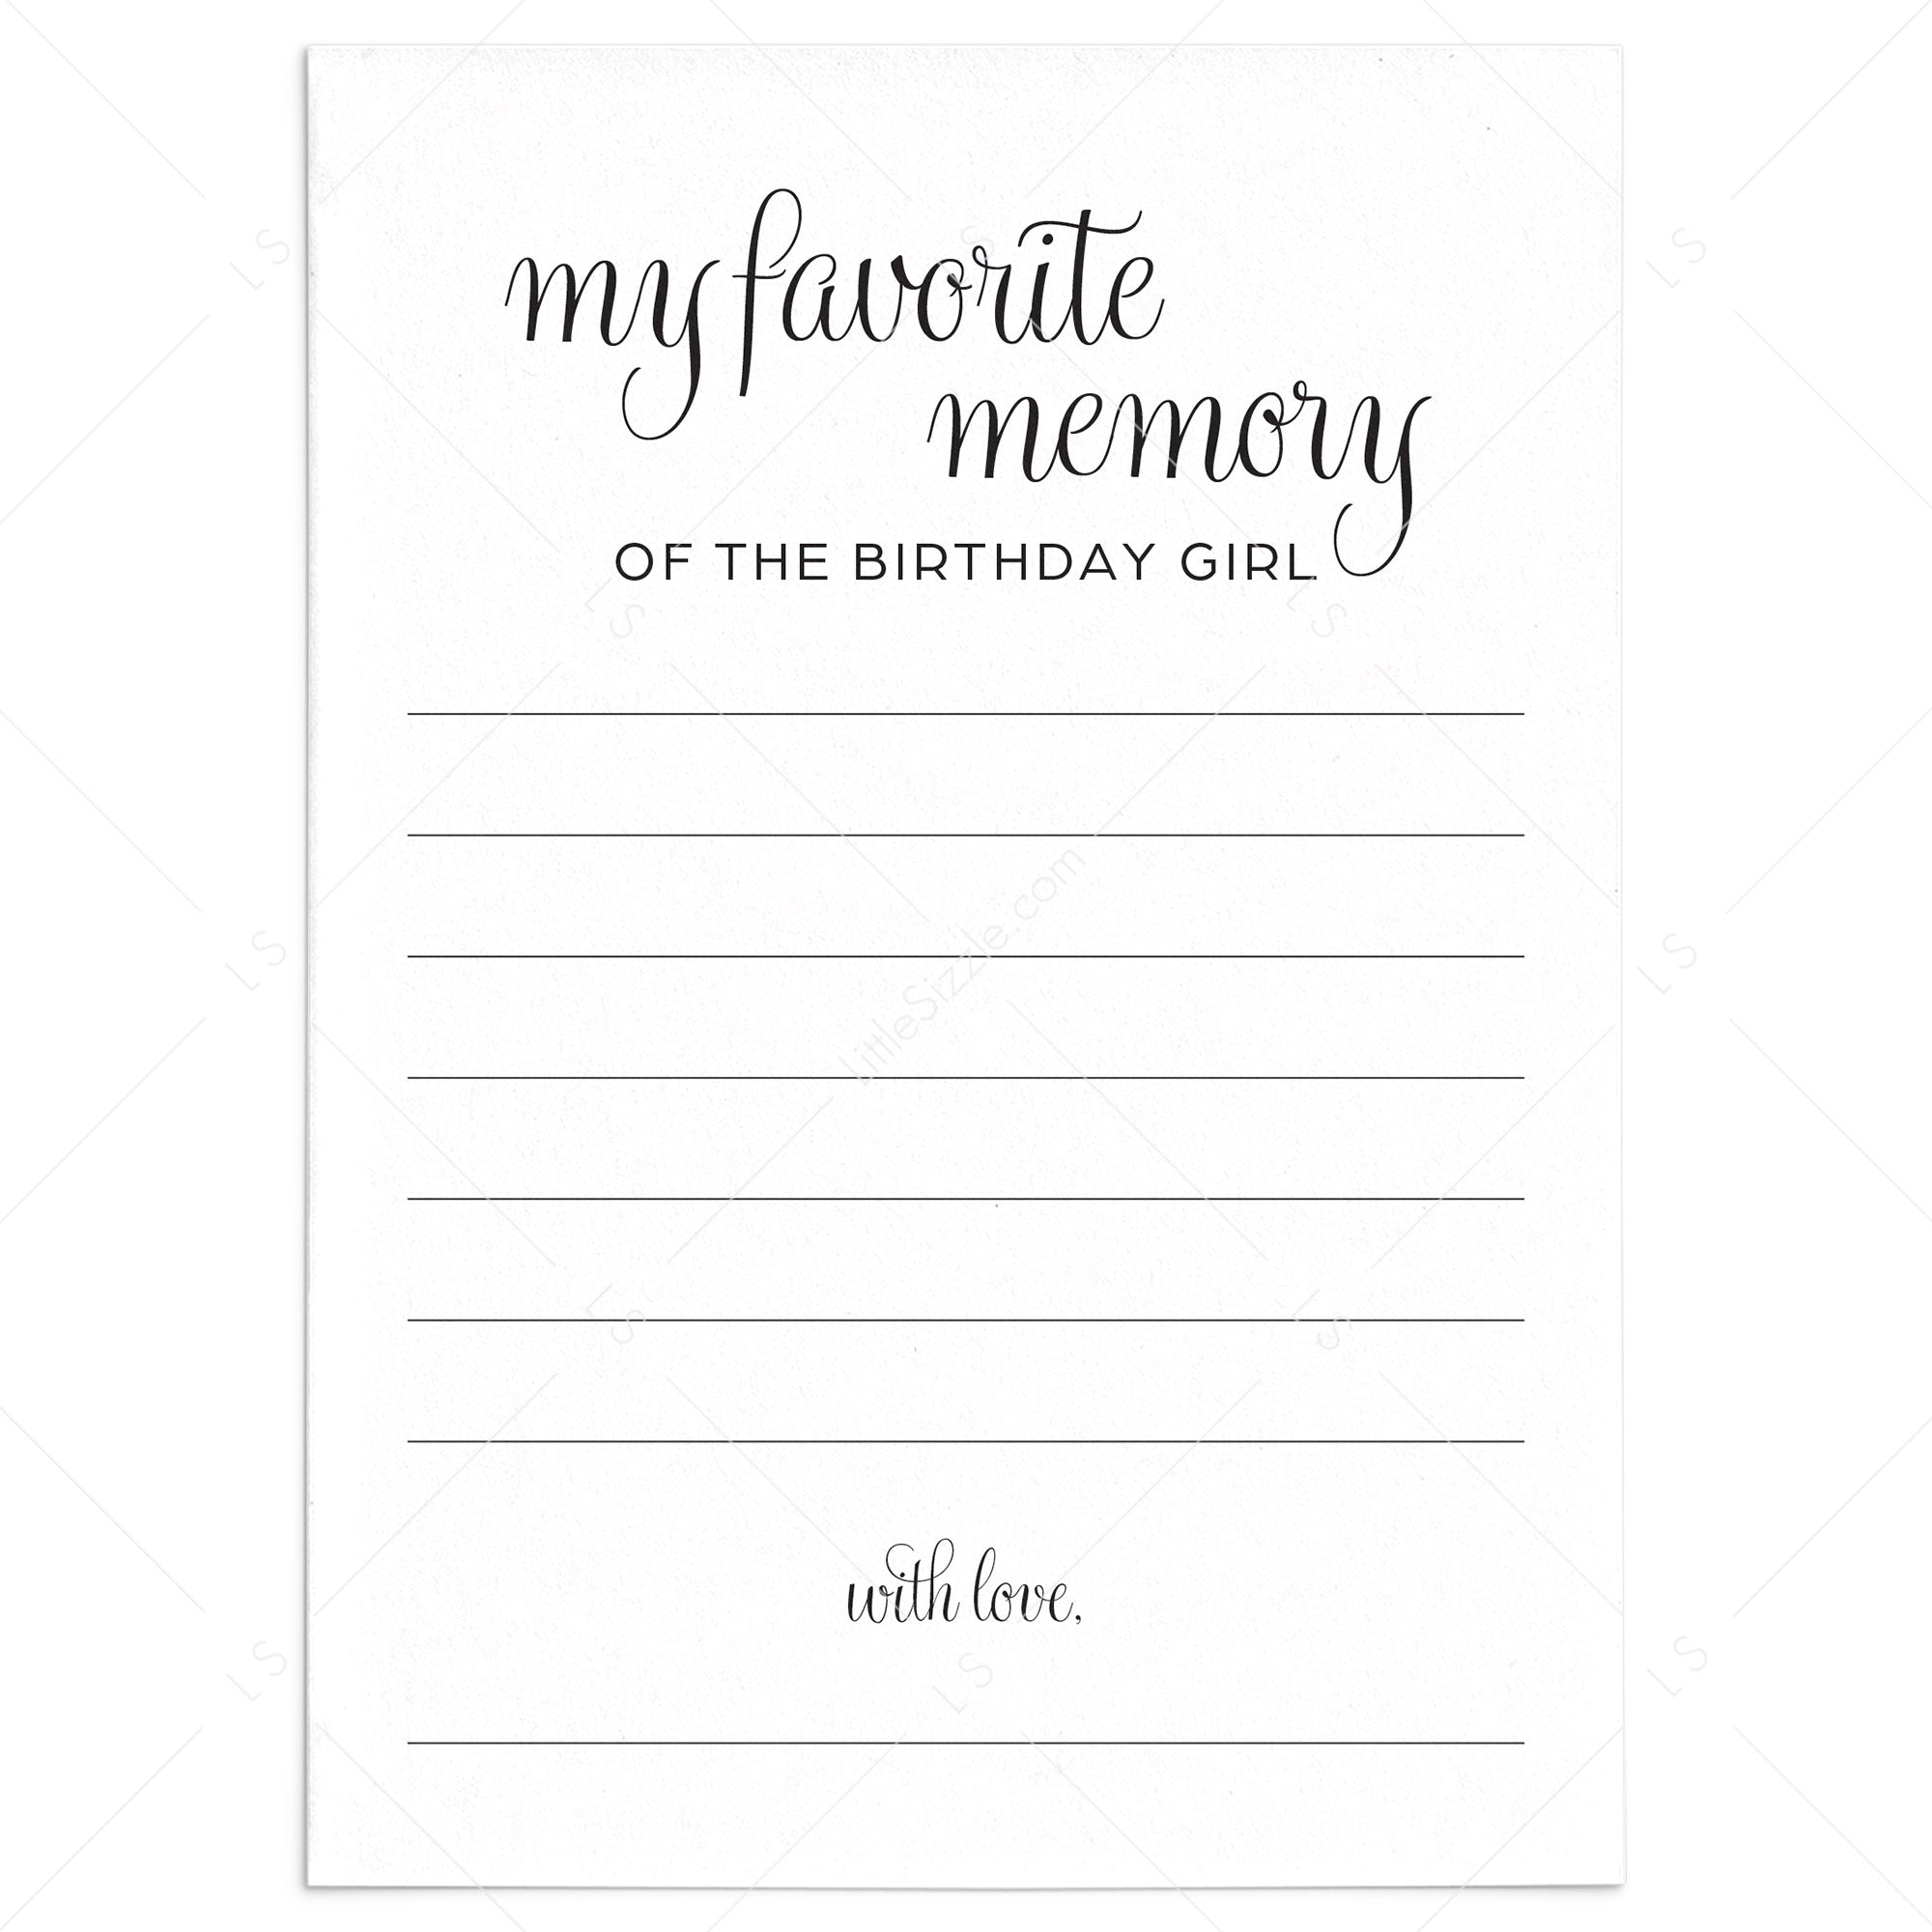 Share Your Favorite Memory Of The Birthday Girl Cards Printable by LittleSizzle